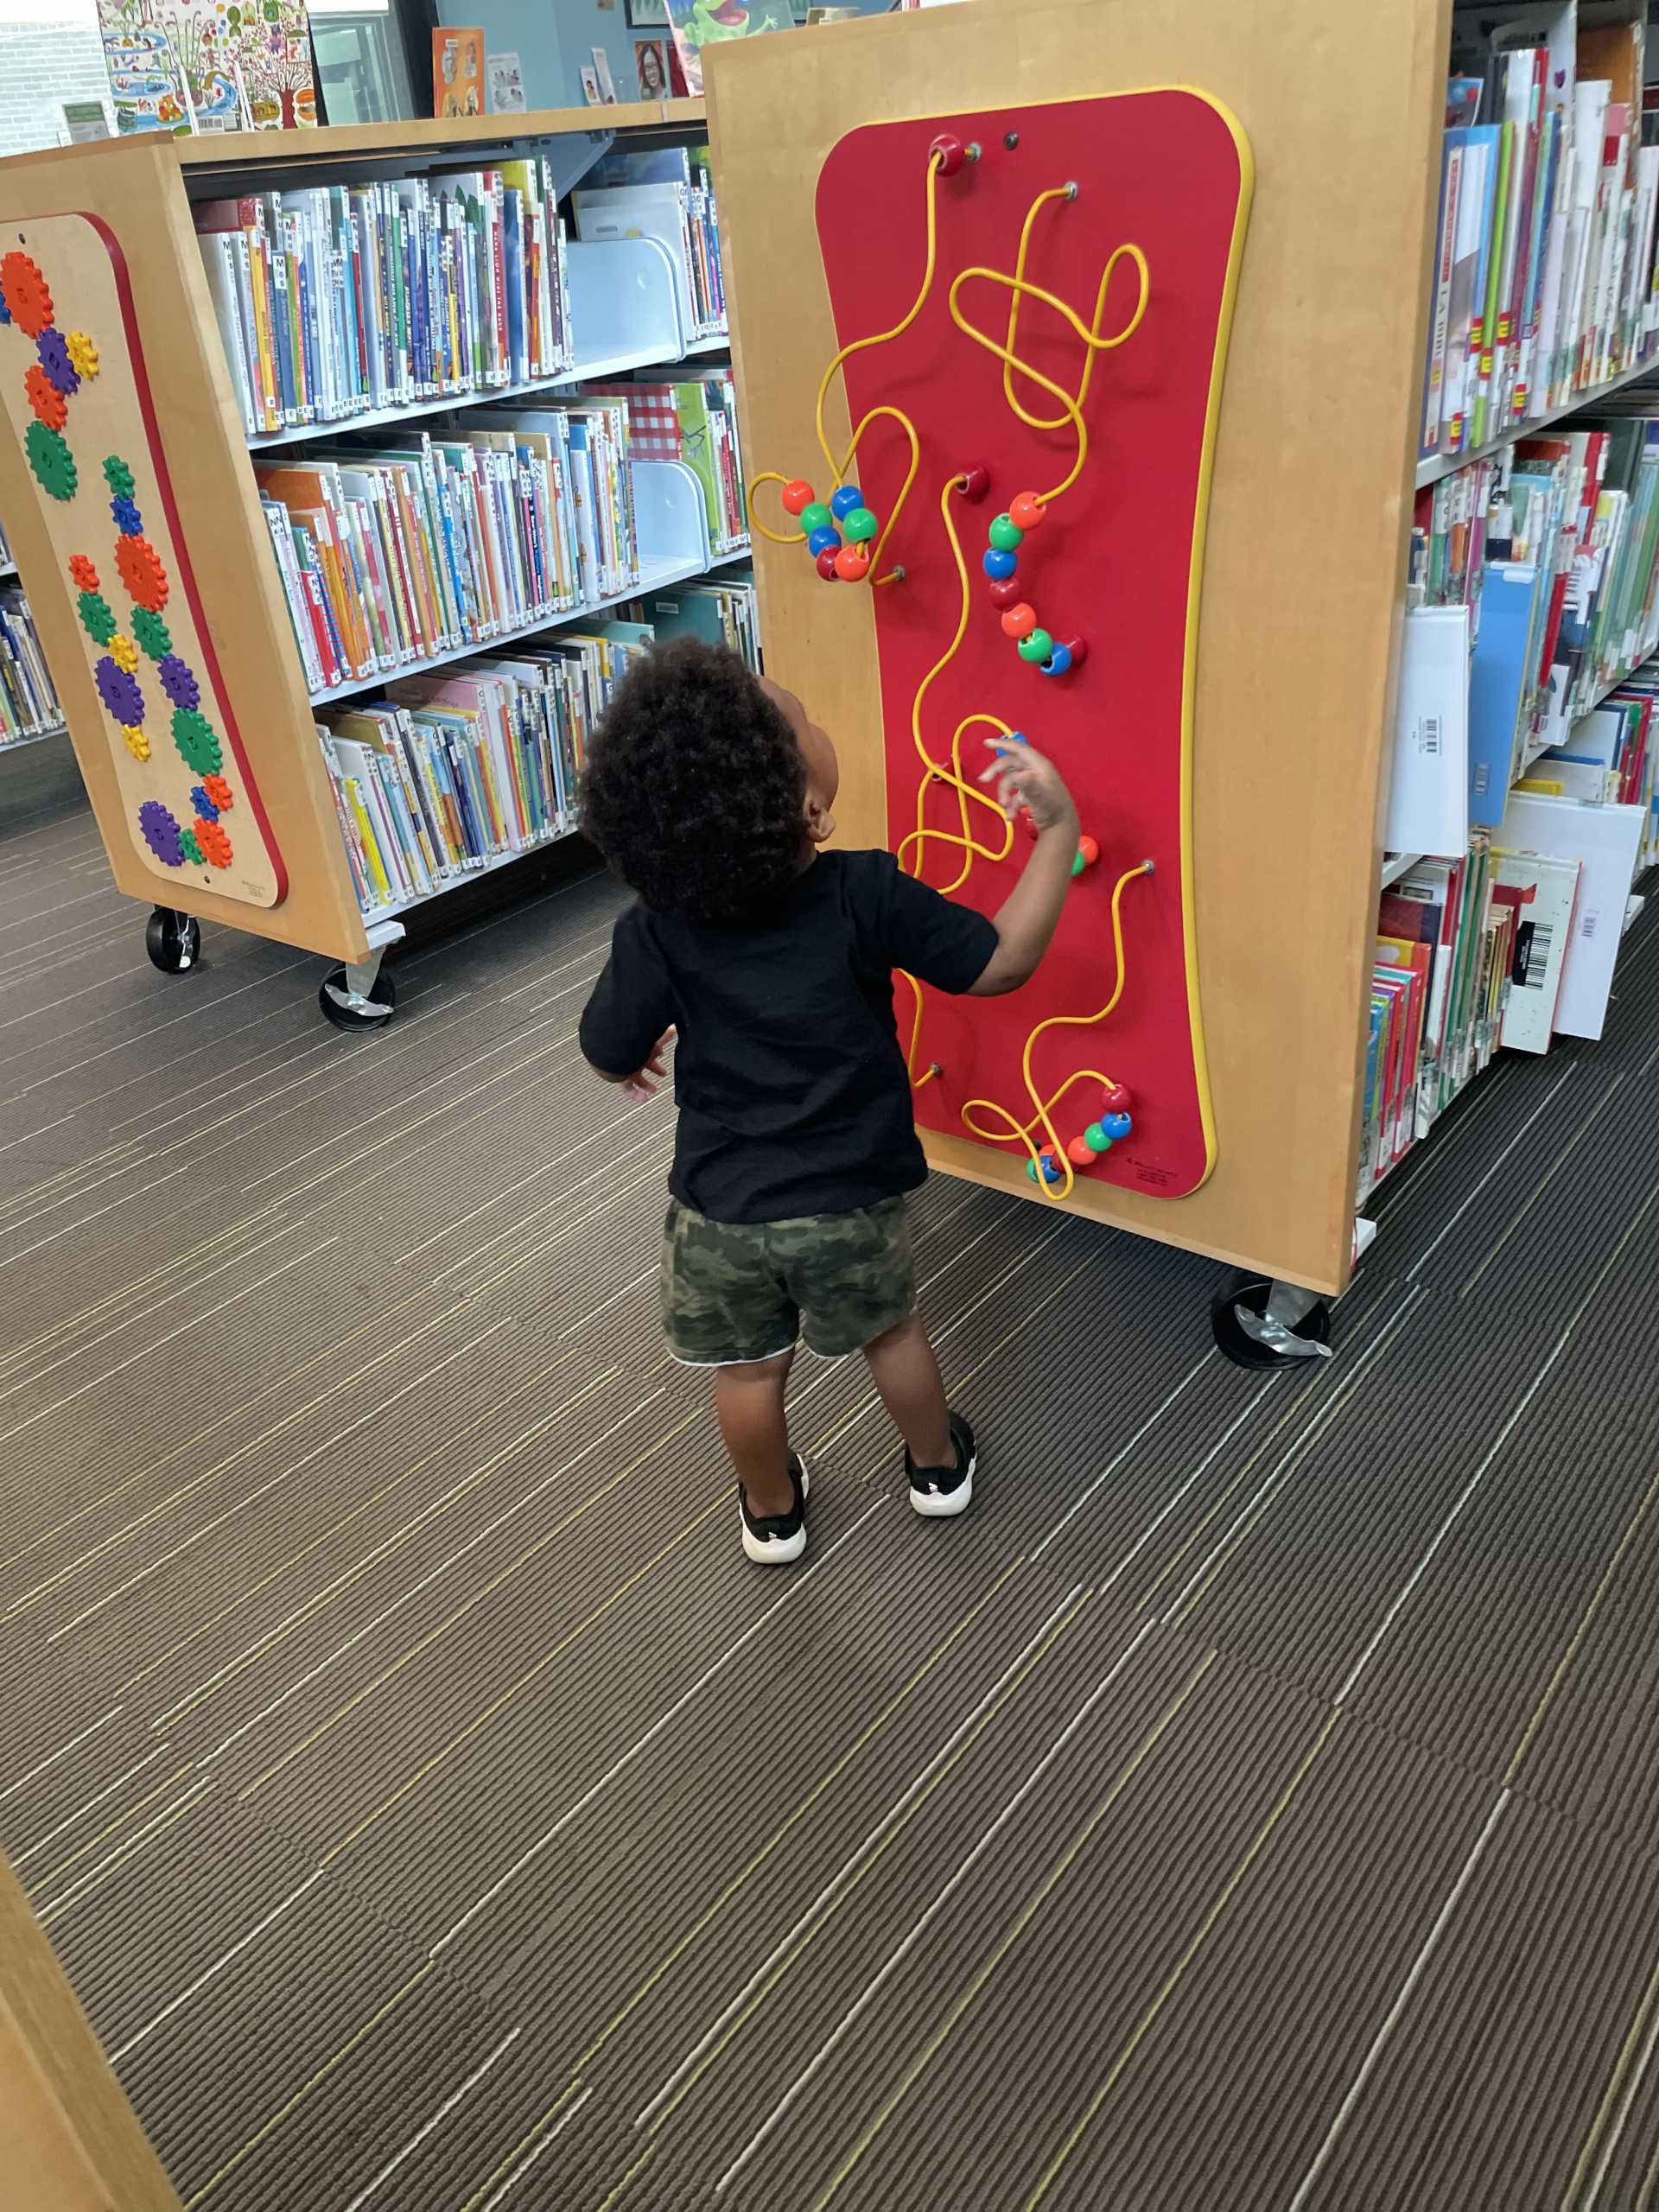 Checking out the other activities at the library.